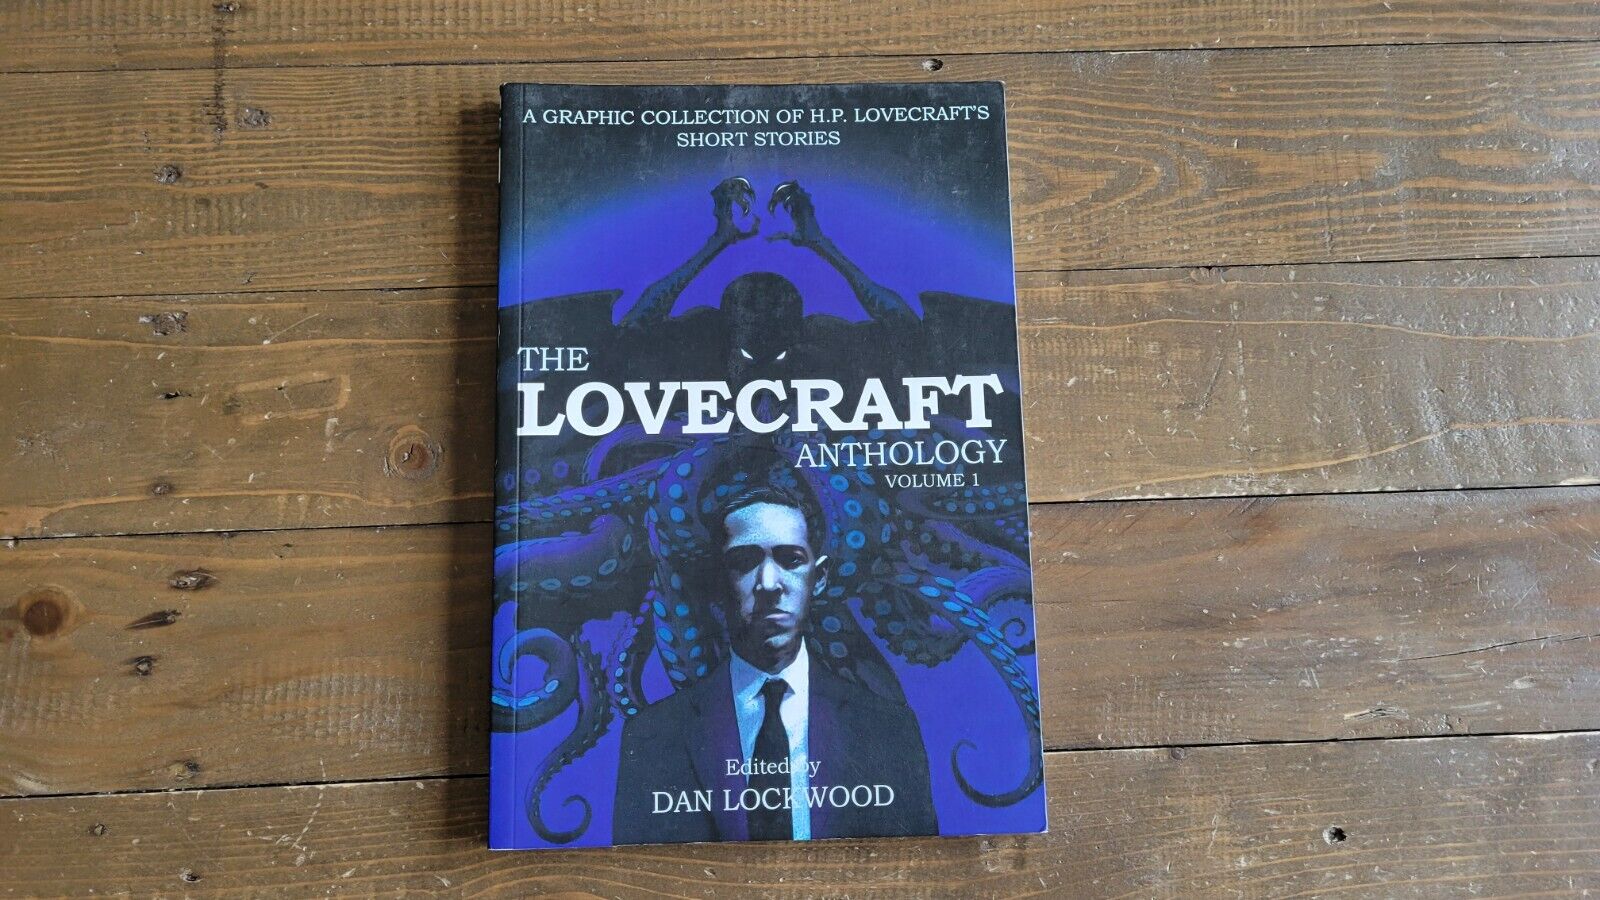 The Lovecraft Anthology Vol. 1 Graphic Novel